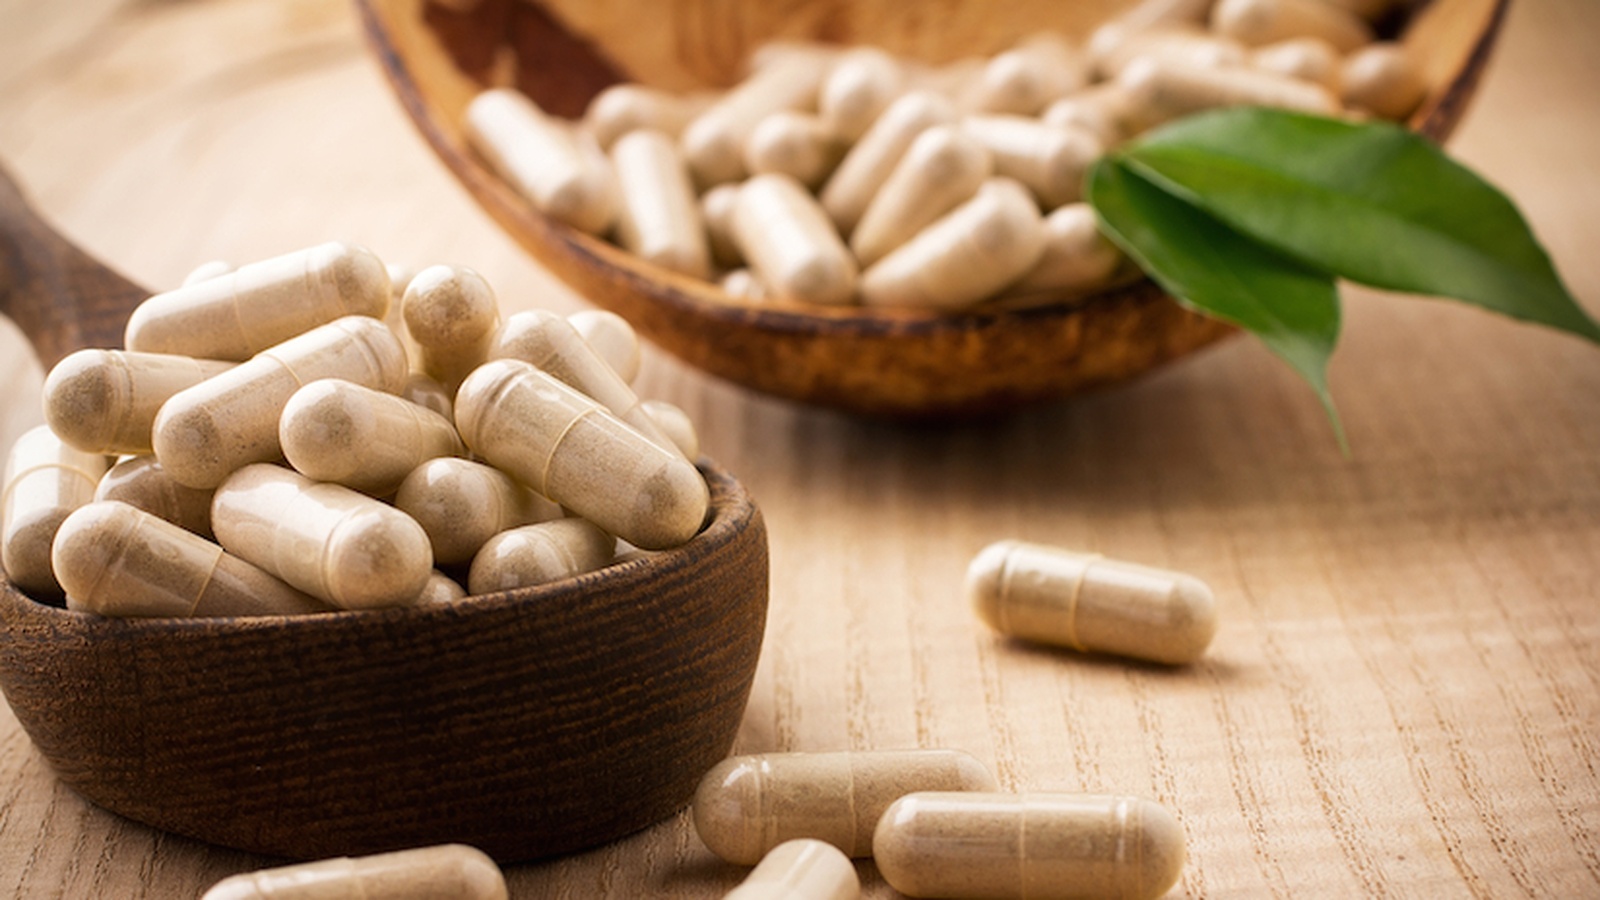 How Doctors Use (Or Should Use) Vitamin Therapy